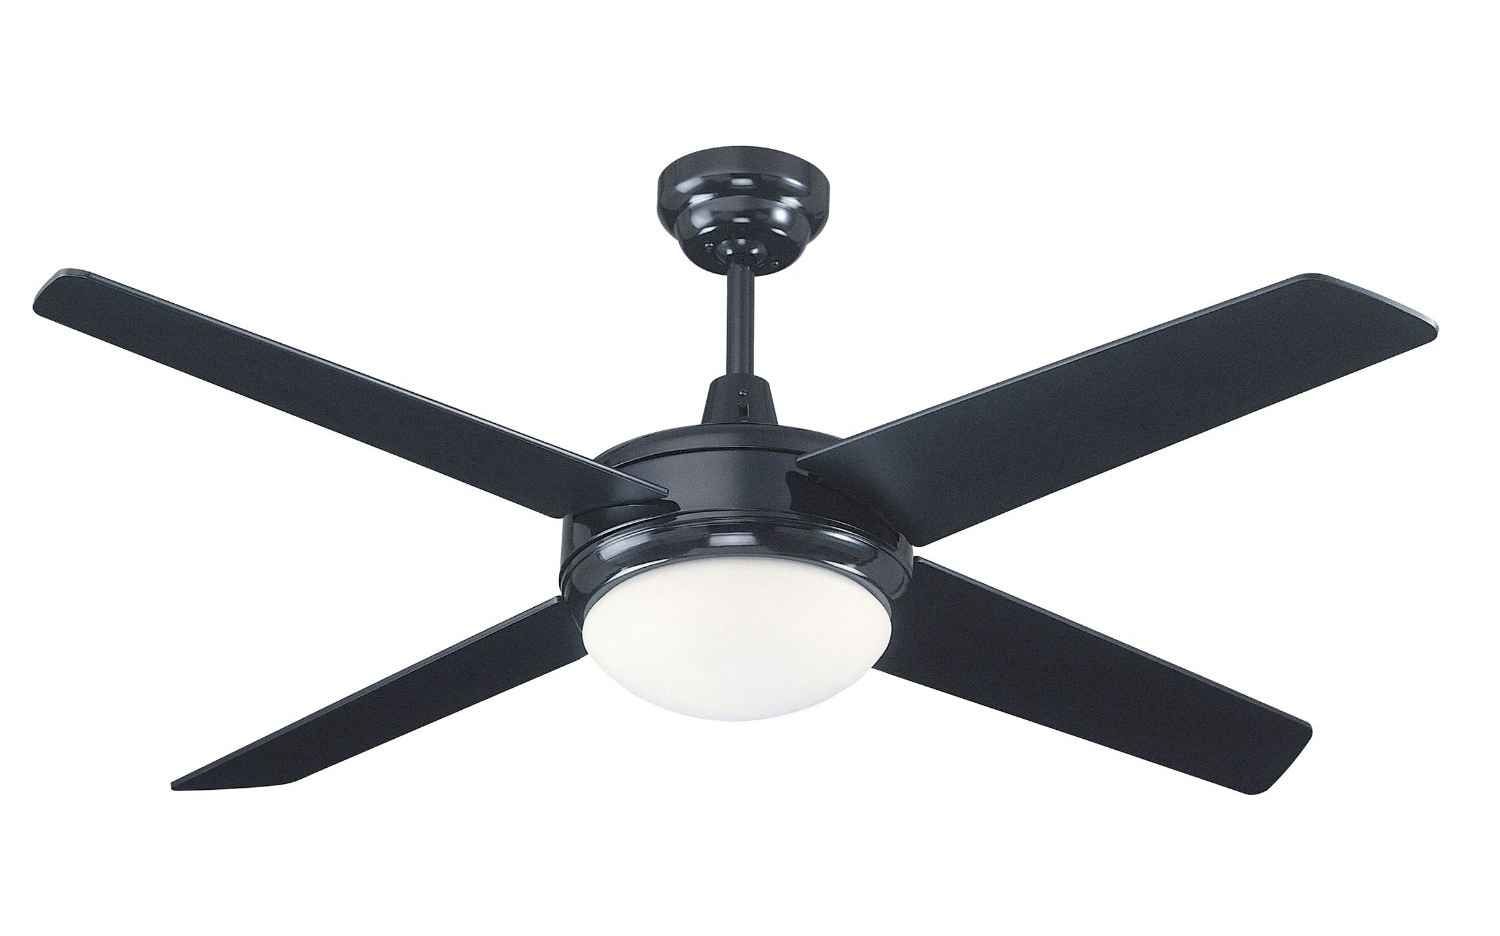 Newknowledgebase Blogs: Ceiling Fan Lighting For Outdoors Inside Black Outdoor Ceiling Fans With Light (View 3 of 15)